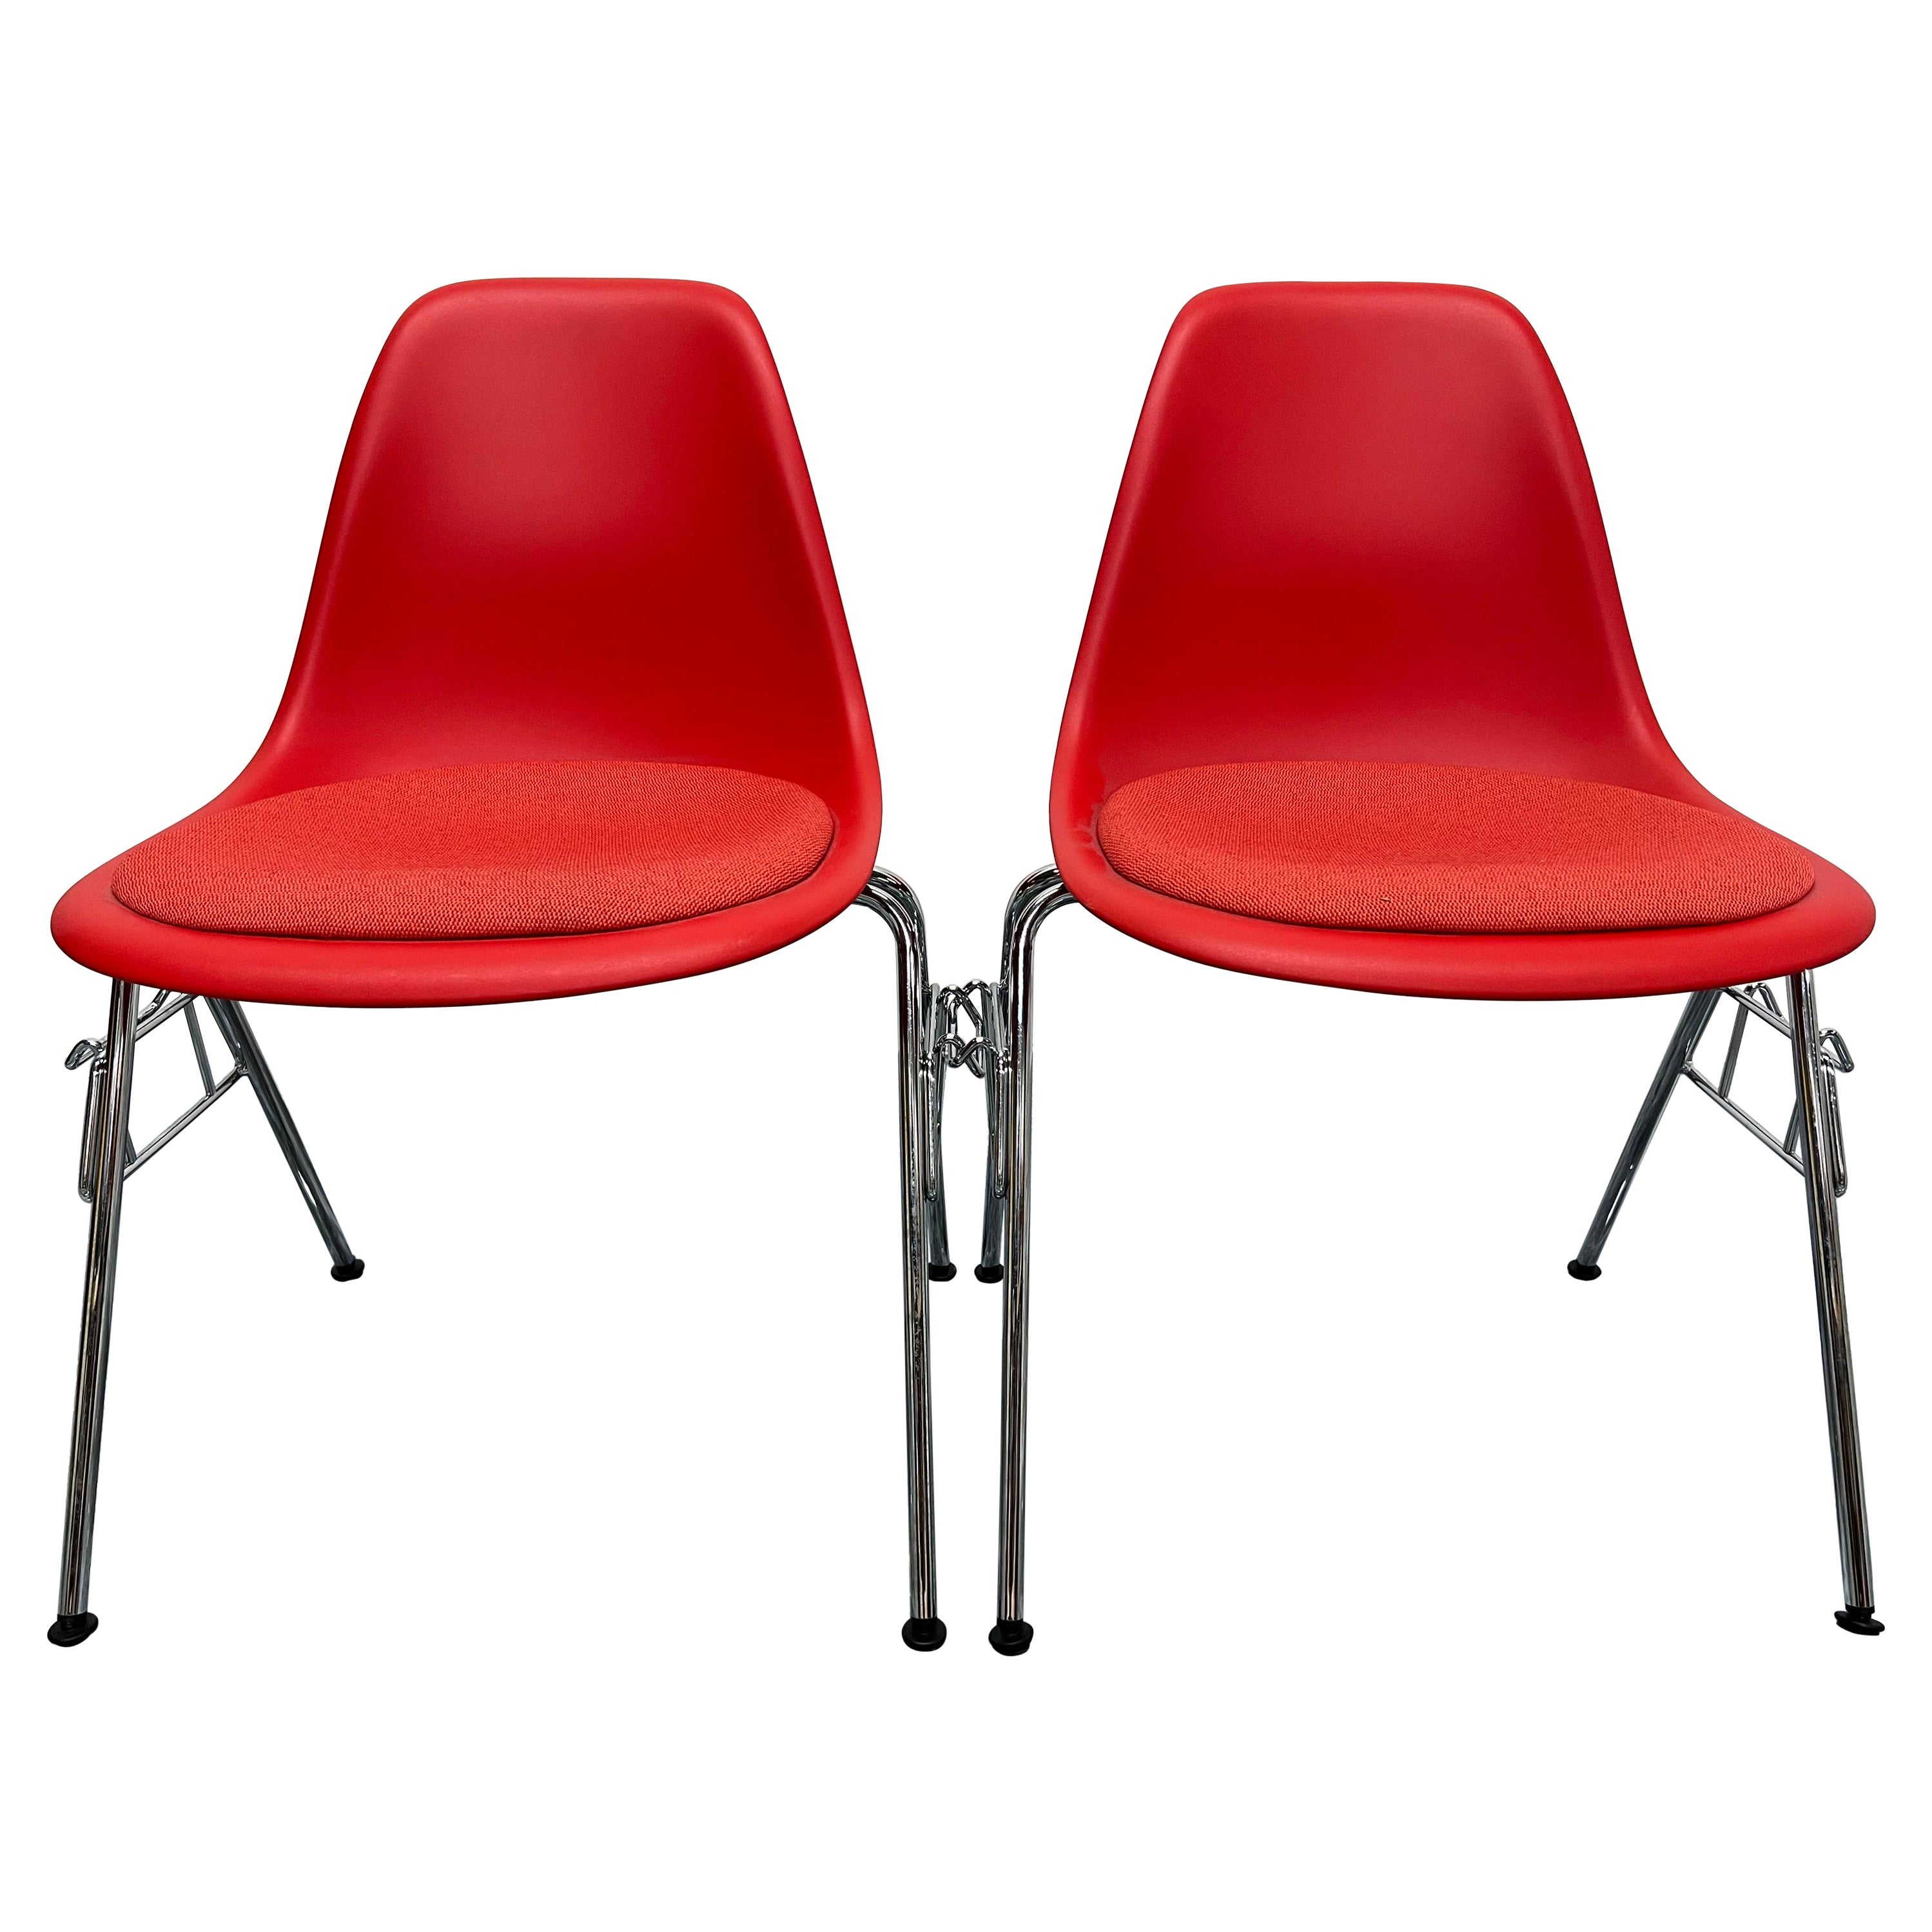 Eames Molded Plastic Chairs with Upholstered Seats for Herman Miller, a Pair